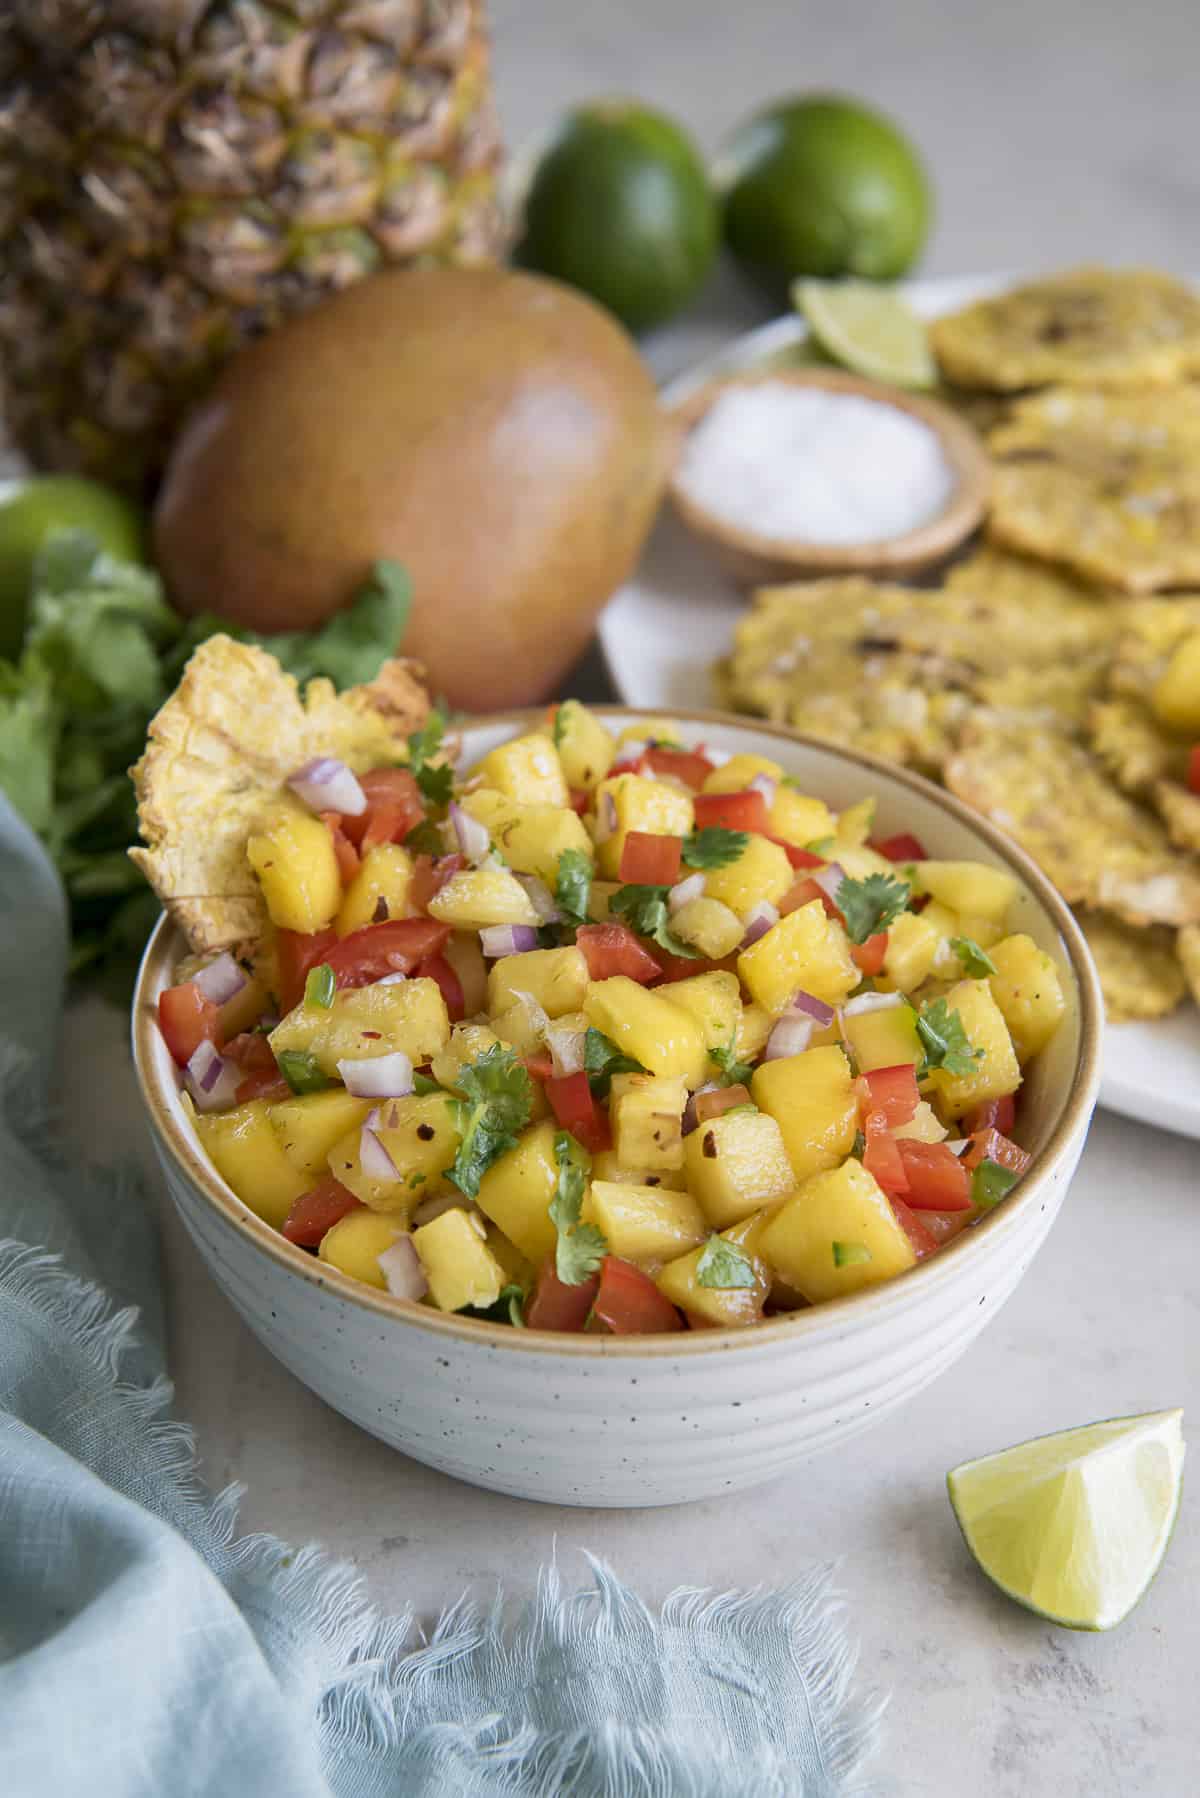 A fried tostone dipped in a white bowl of Pineapple Mango Salsa, surrounded by cilantro, limes, mango, a pineapple, and a platter of fried tostones